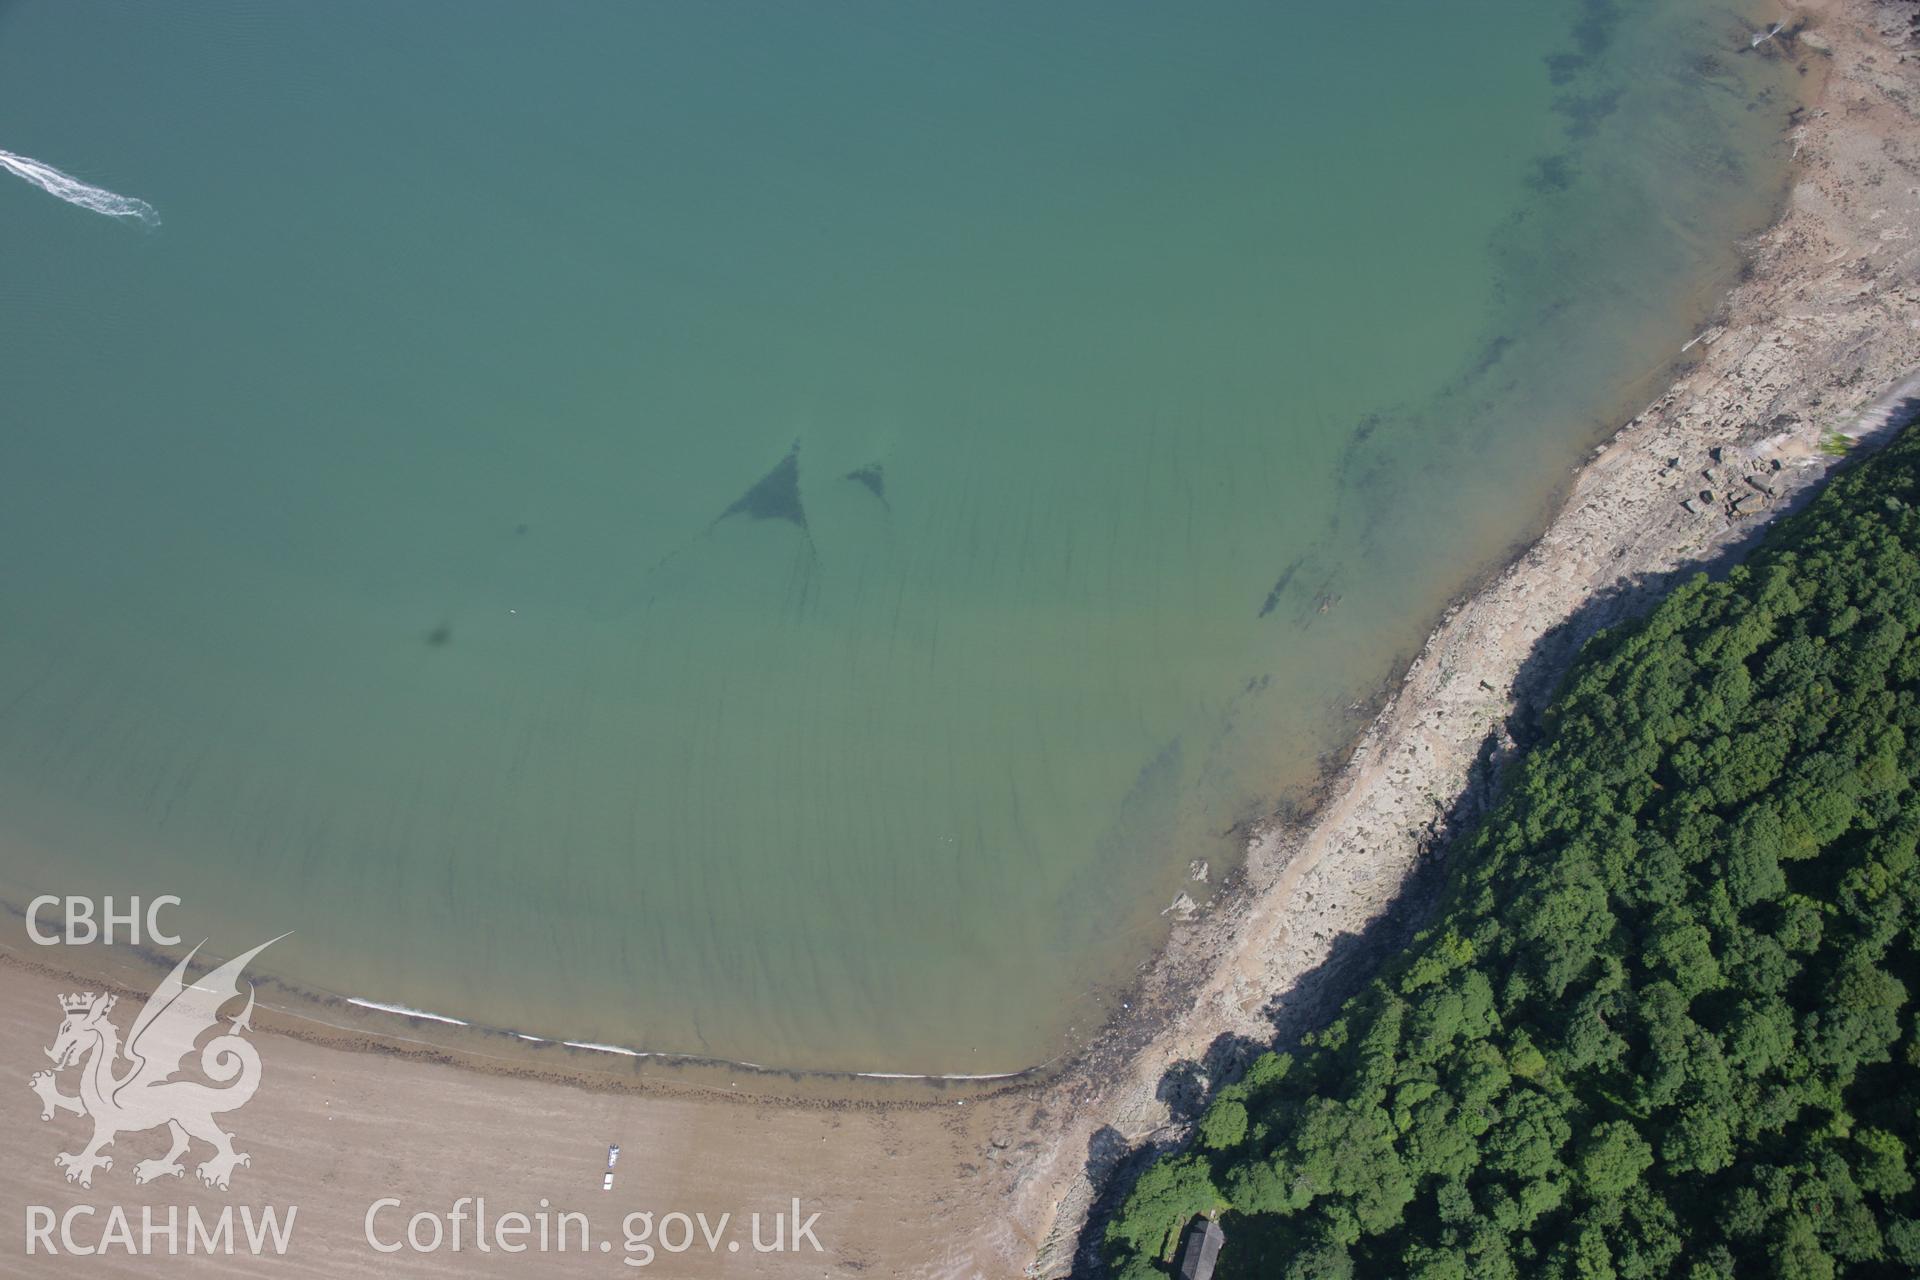 RCAHMW colour oblique aerial photograph of Oxwich Bay, Fish Traps. Taken on 11 July 2006 by Toby Driver.